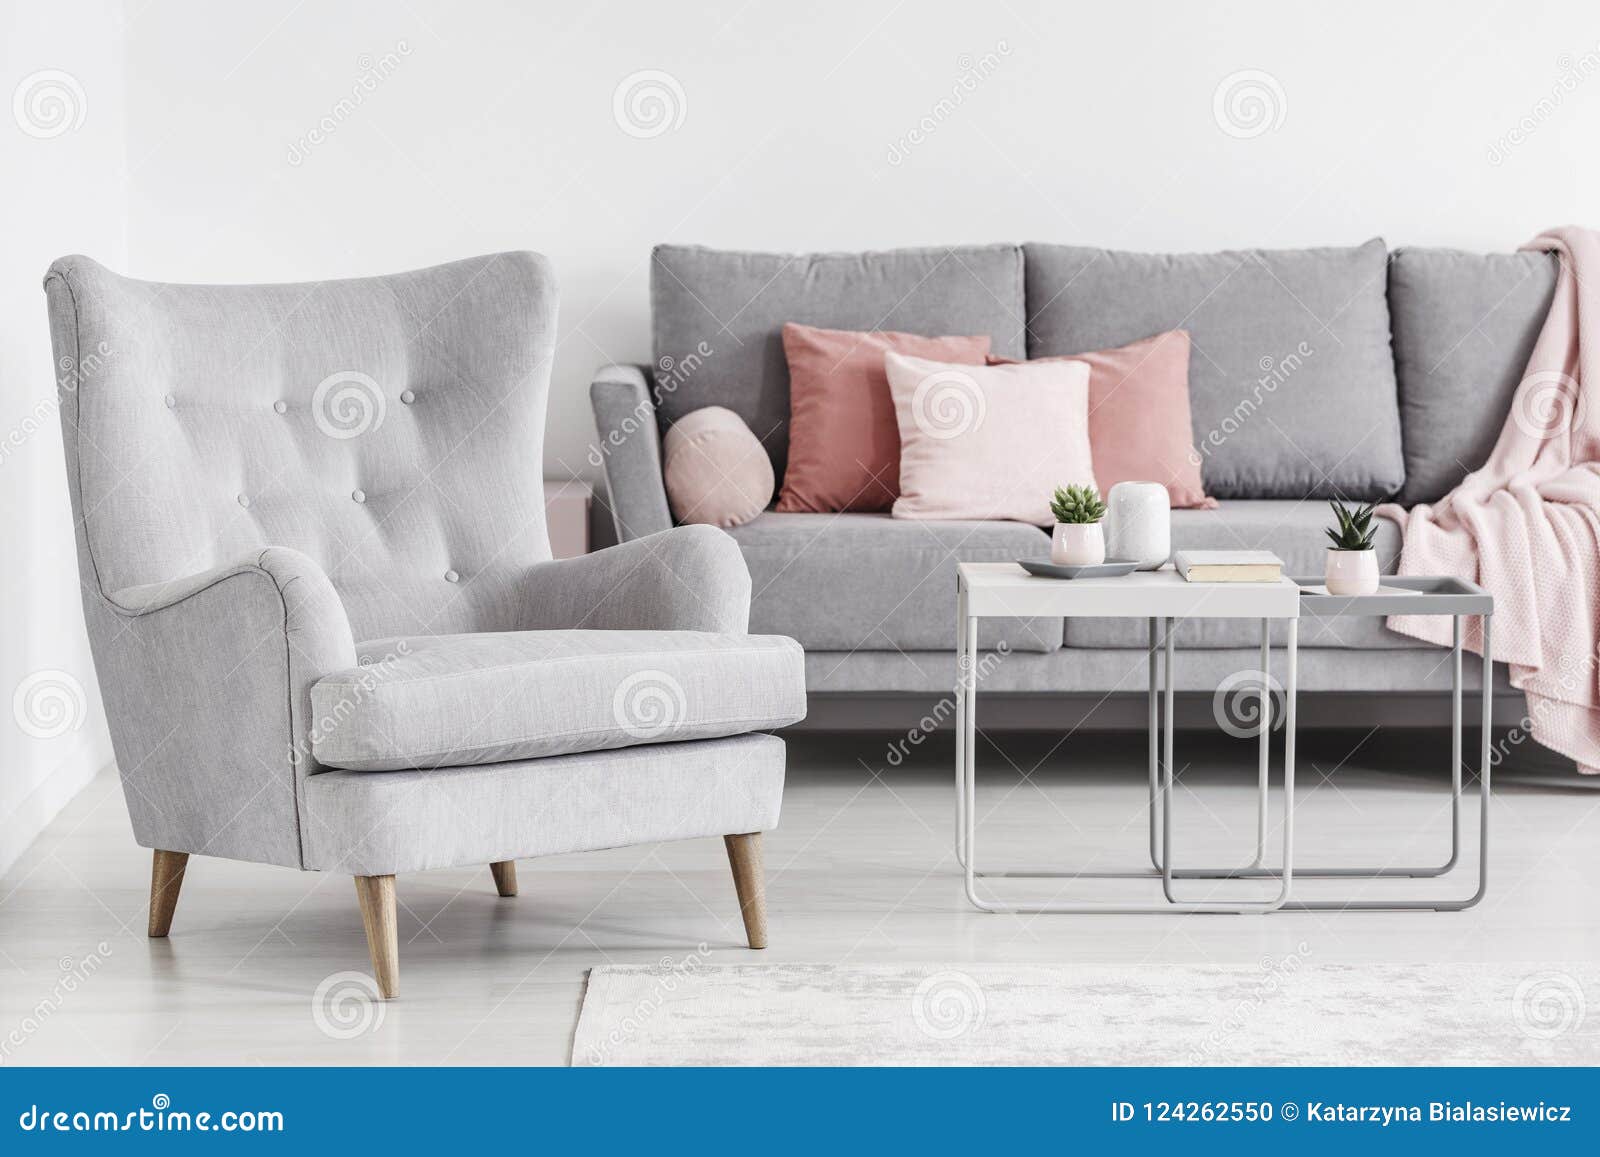 comfy armchair and grey sofa with pink pillows, and coffee table